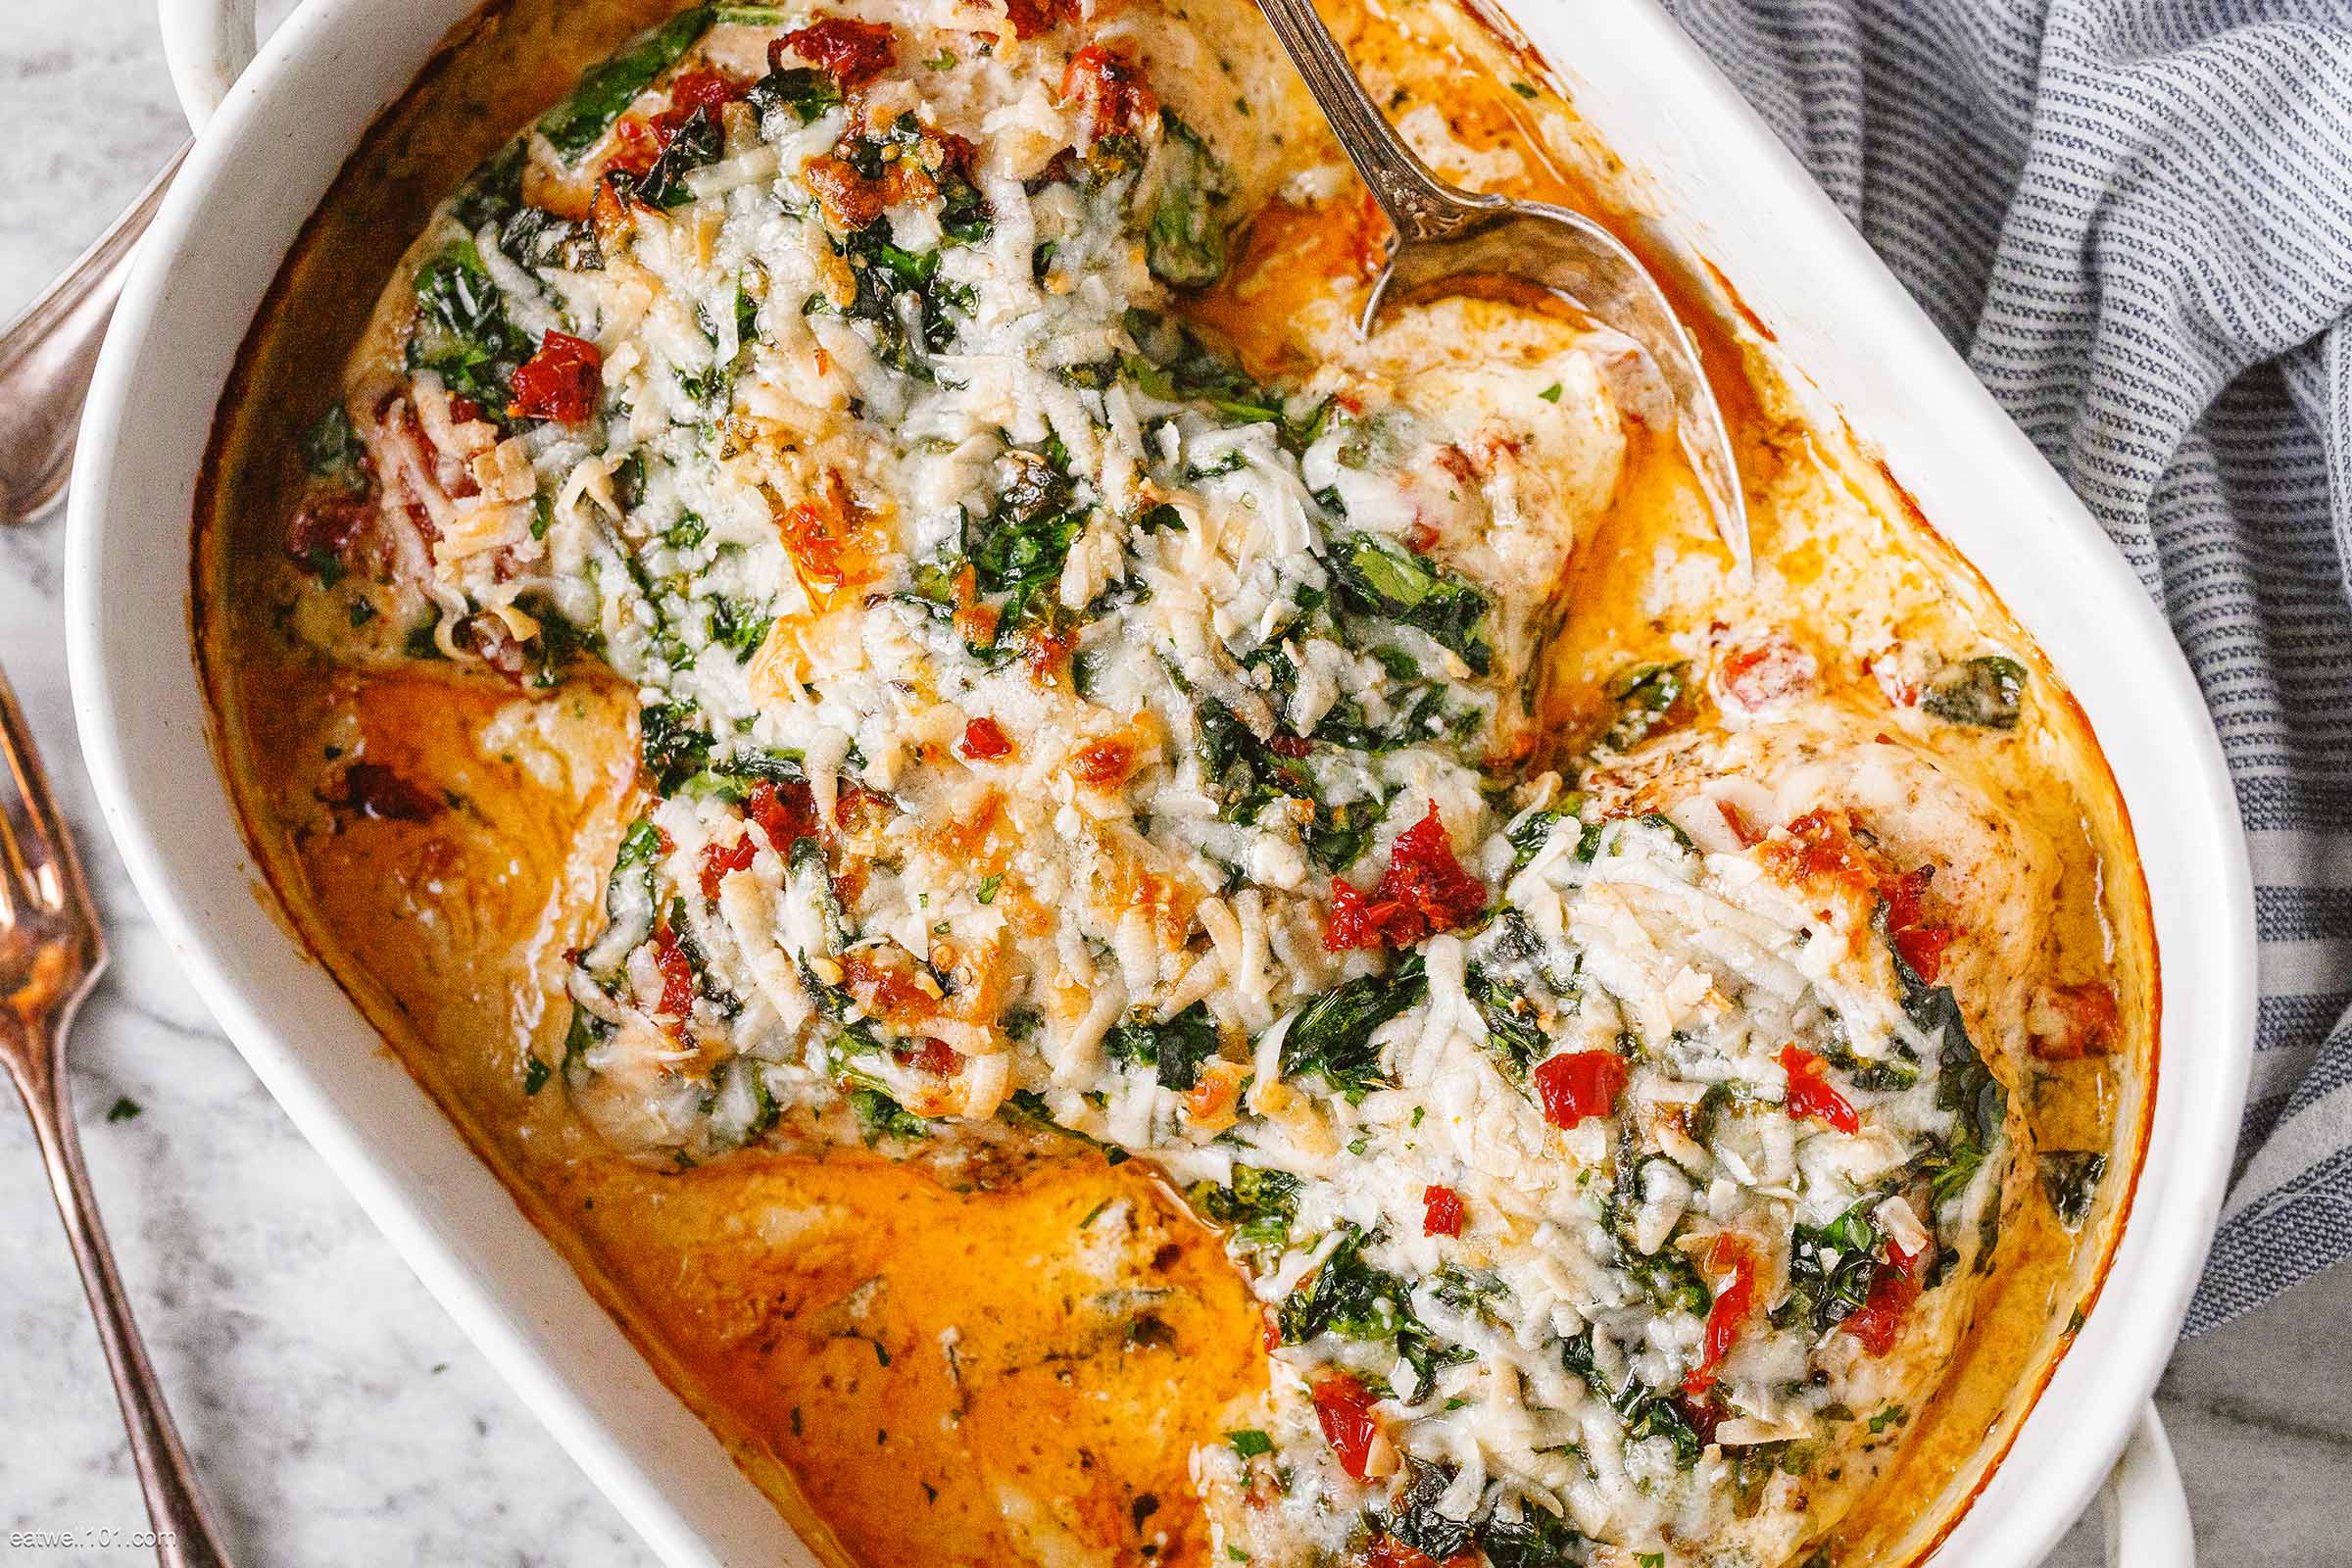 Creamy Chicken Breast Bake with Spinach and Sun-Dried Tomatoes